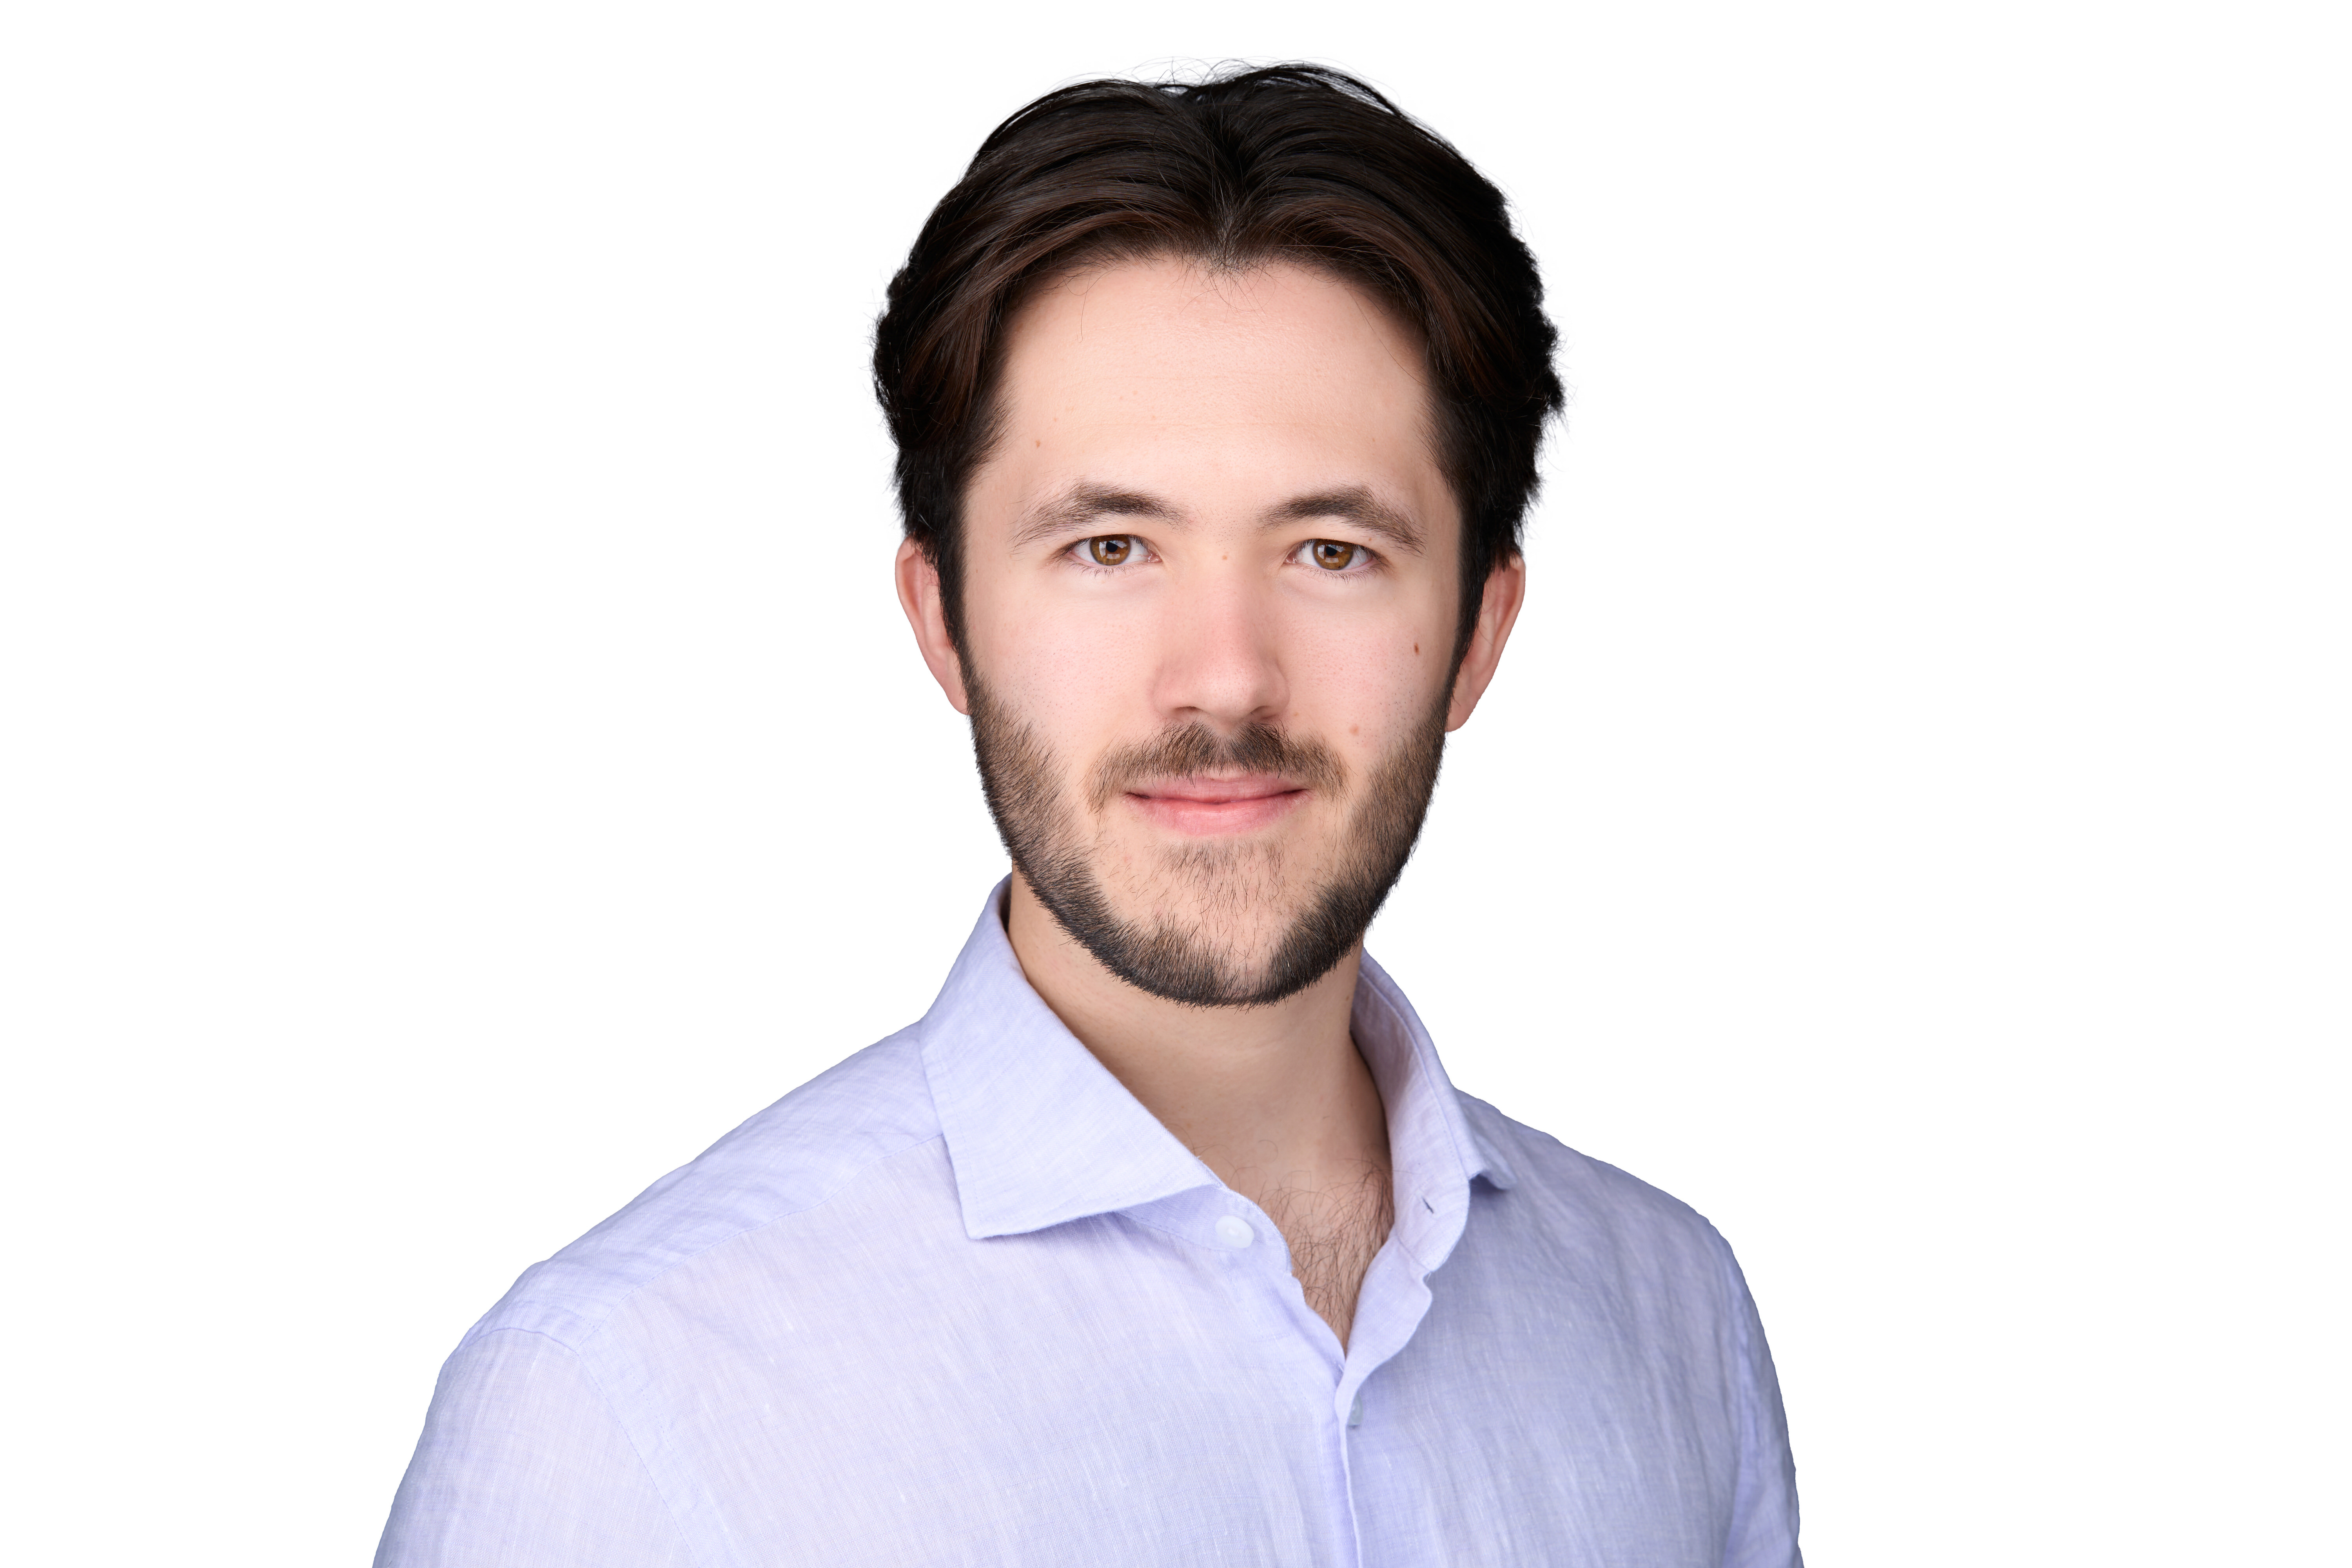 Photo of Richard Banks, Fund Administration Analyst at Calculus Capital, London